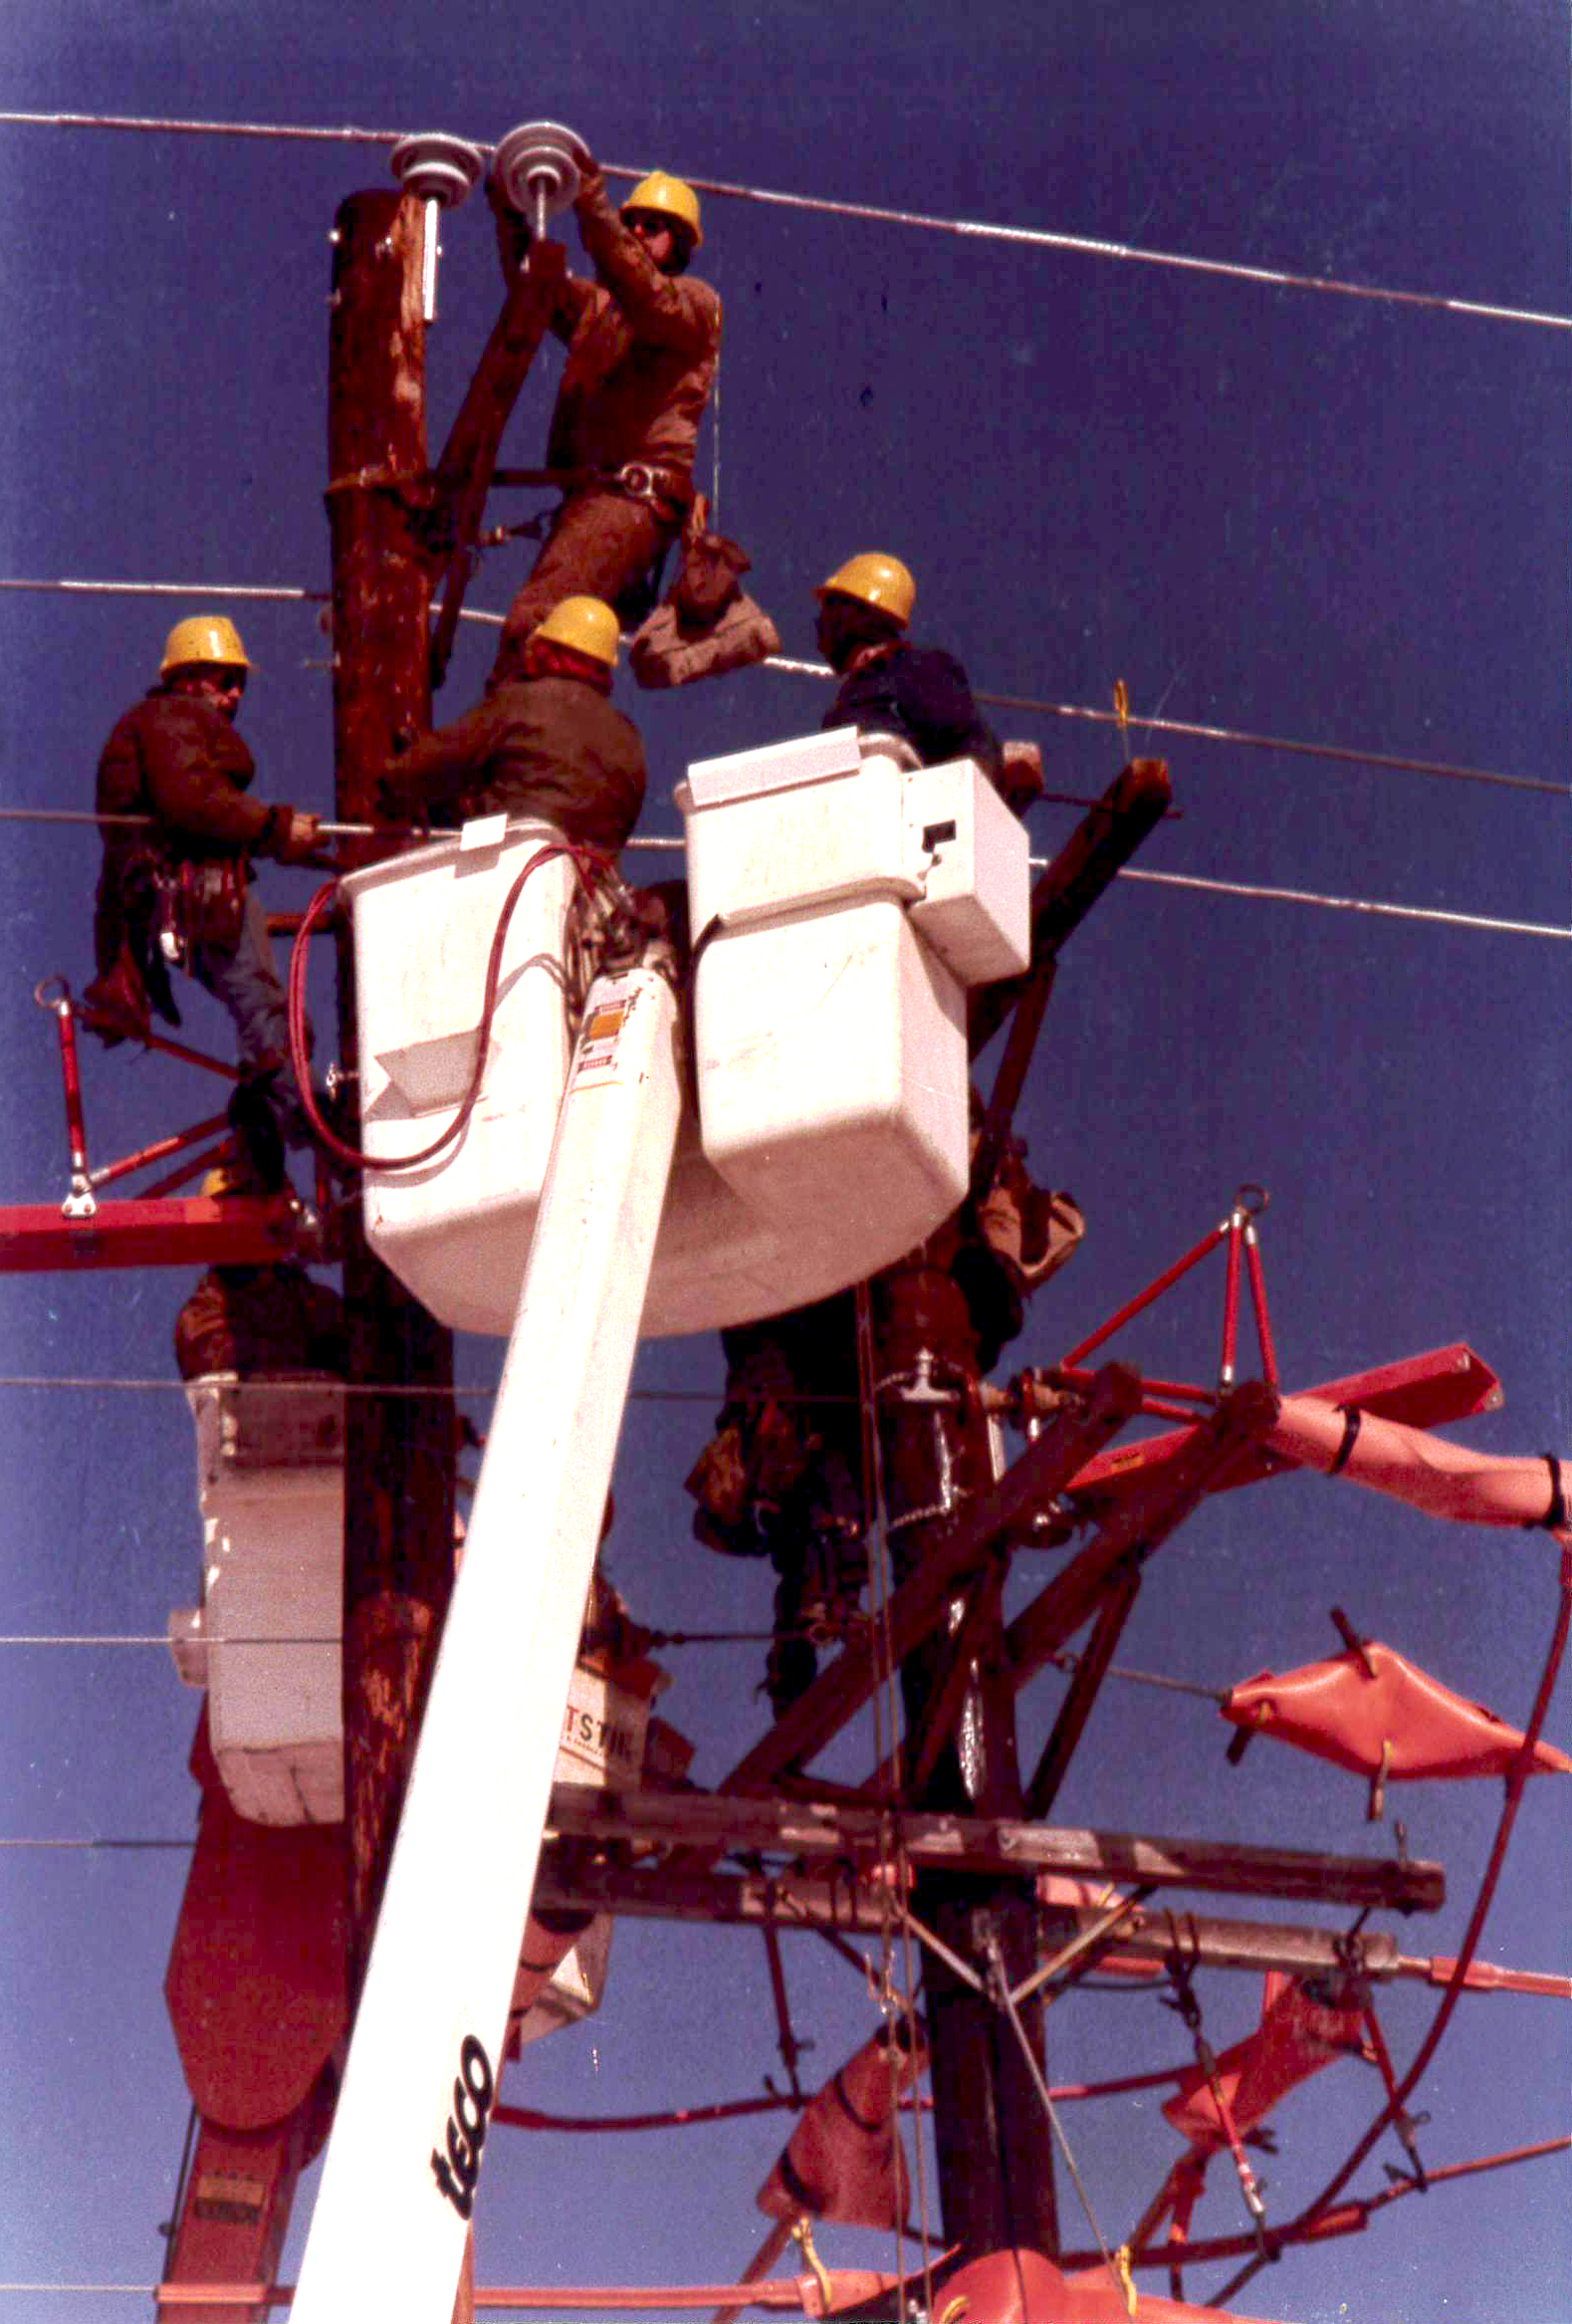 A vintage photo depicting a group of linemen from Sussex Rural Electric Cooperative performing work on a pole, changing out reclosers. Two of the linemen had climbed the pole to perform this work, with support from the other two working out of a bucket. They are making use of line covers to protect themselves from shock.